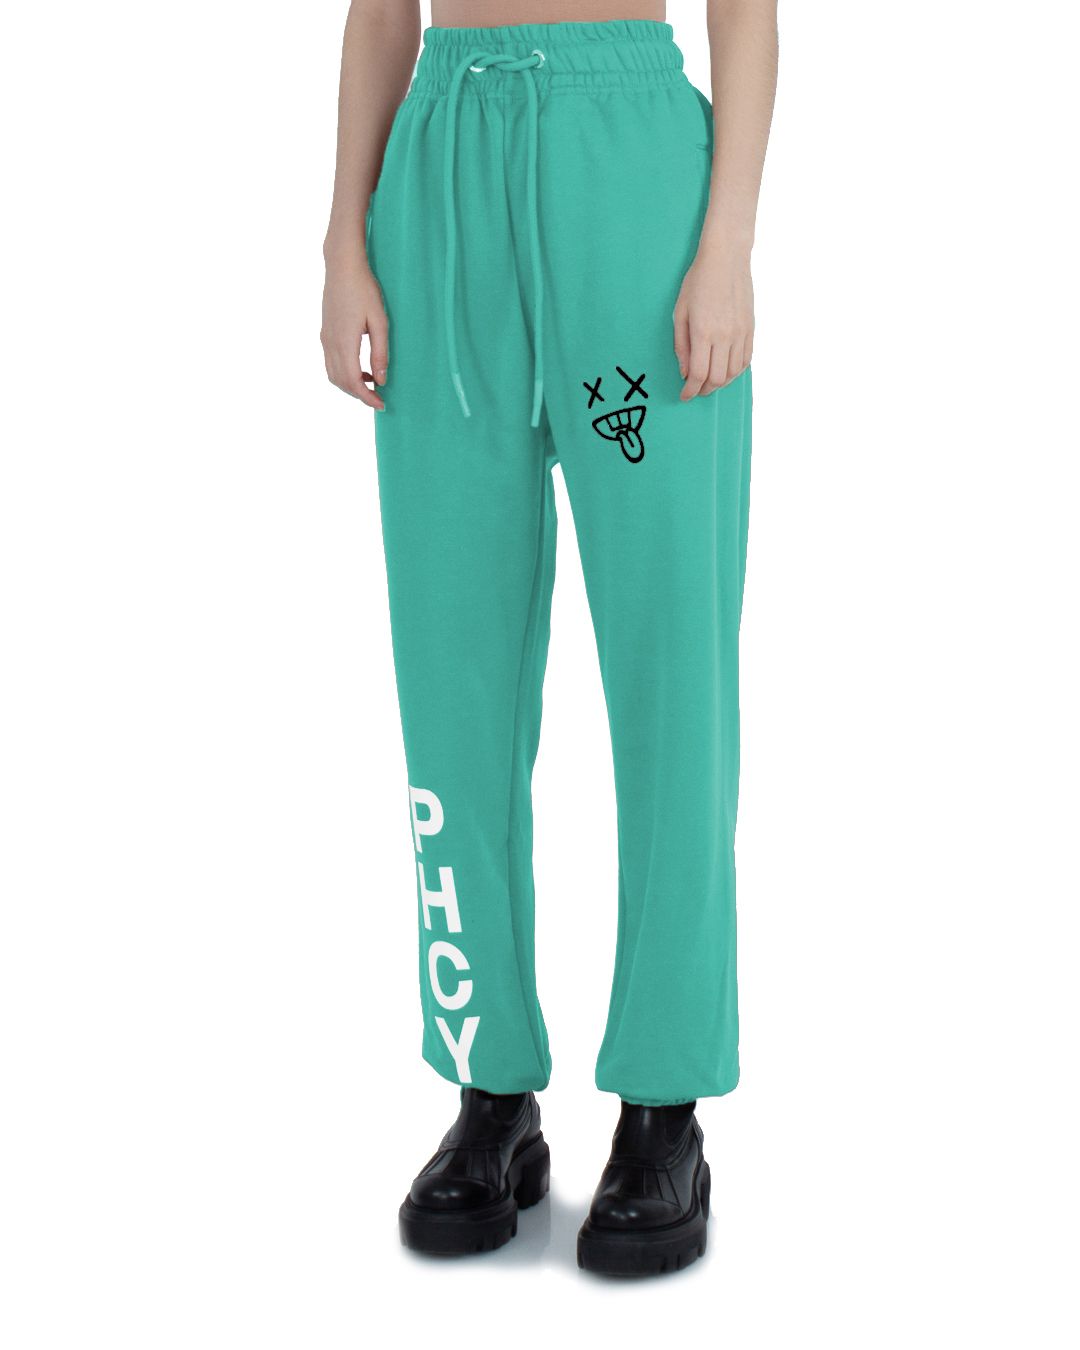 Pharmacy Industry Chic Cotton Jersey Women's Trousers